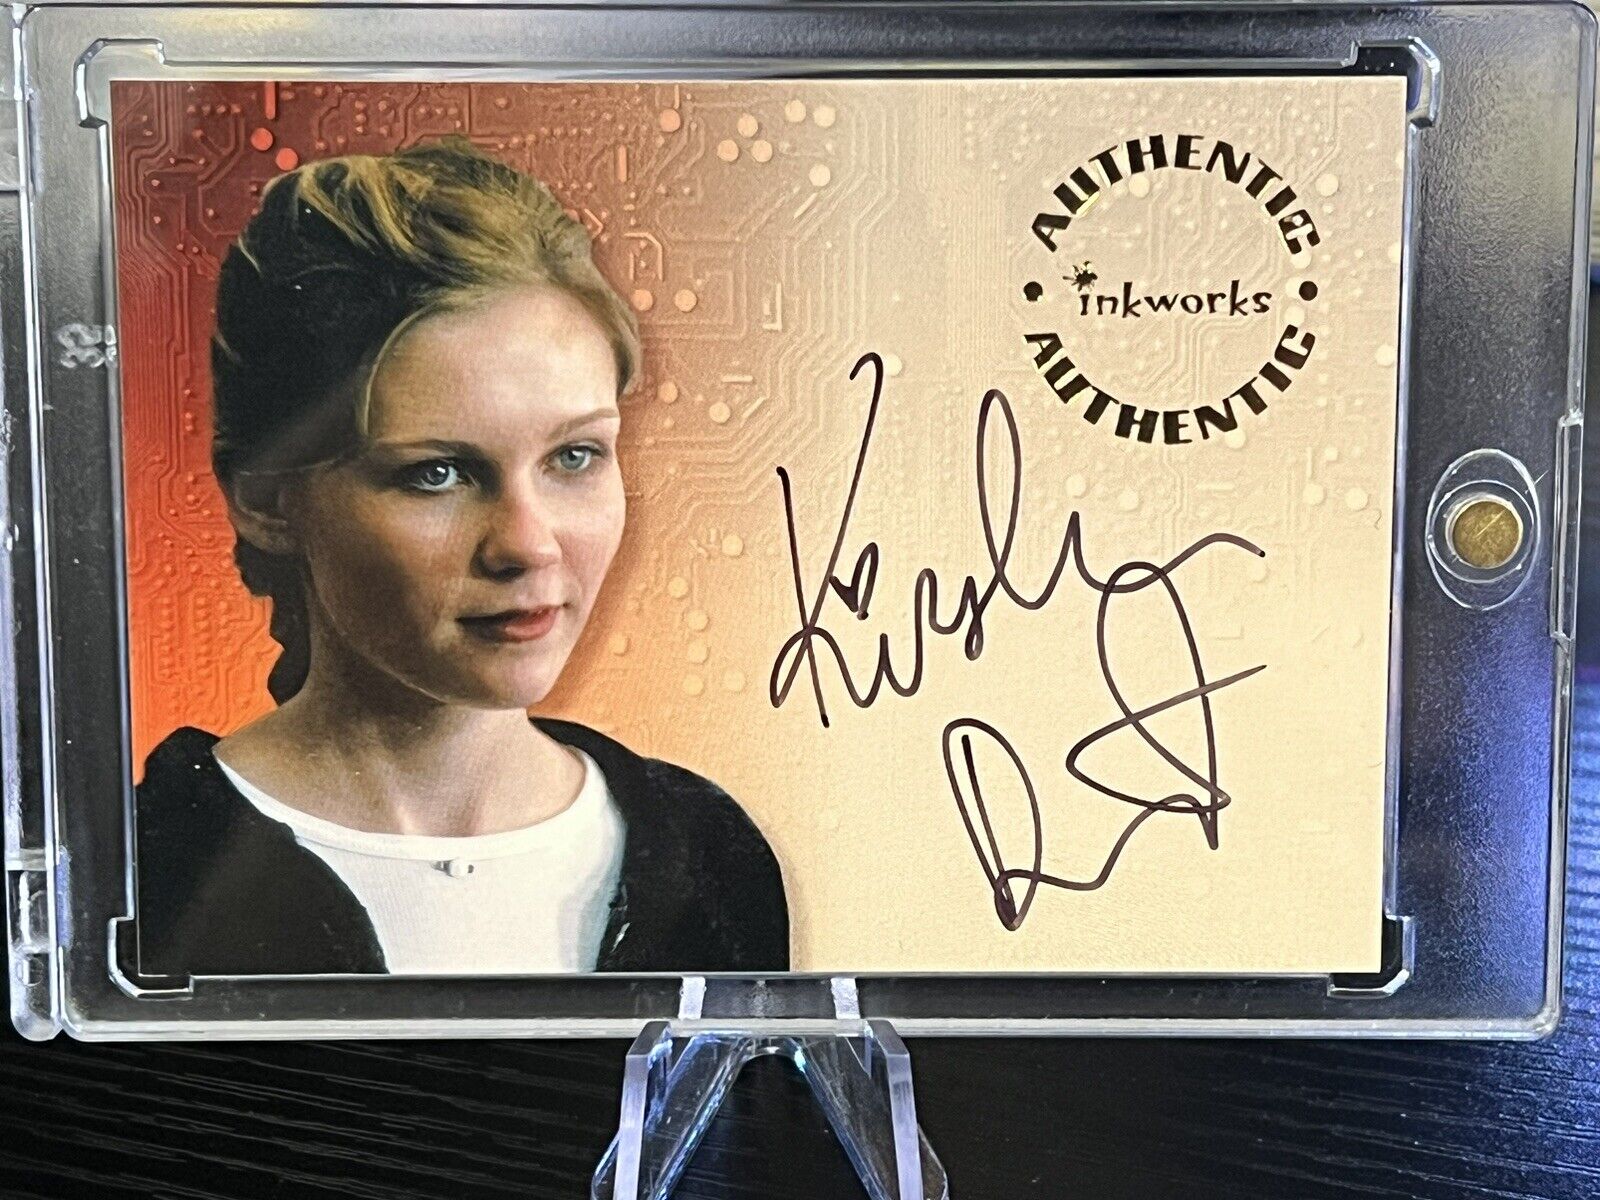 Small Soldiers Kirsten Dunst as Christy Fimple Autograph Card Jumanji Spiderman